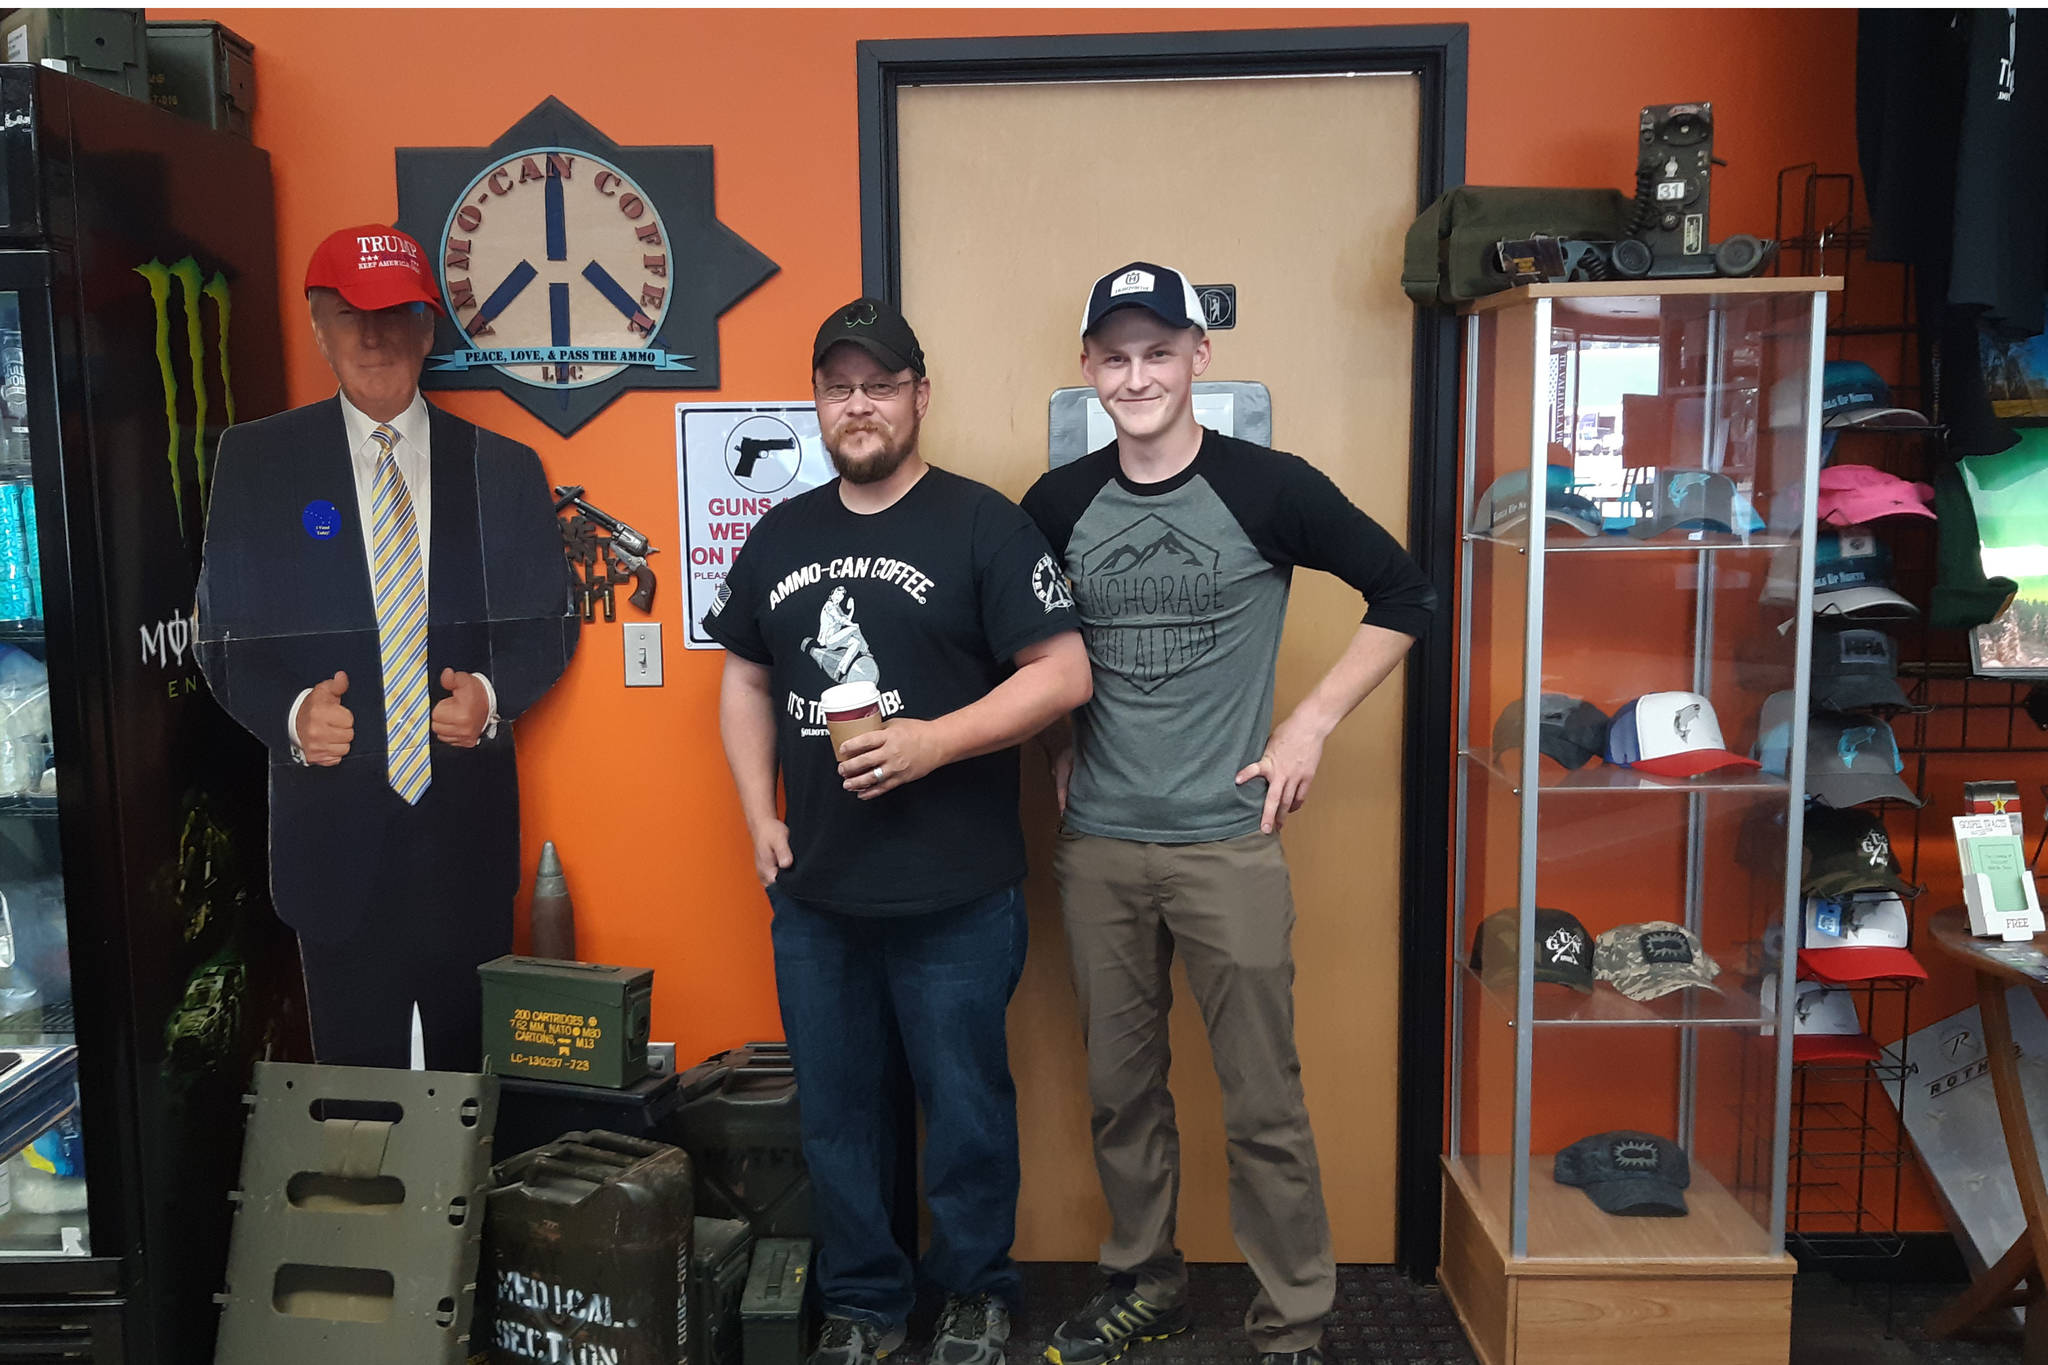 Ammo Can Coffee owner Jason Floyd, left, and his son Liam, right, are seen here at their coffee shop in Soldotna, Alaska on Aug. 16, 2019. (Photo by Brian Mazurek/Peninsula Clarion)